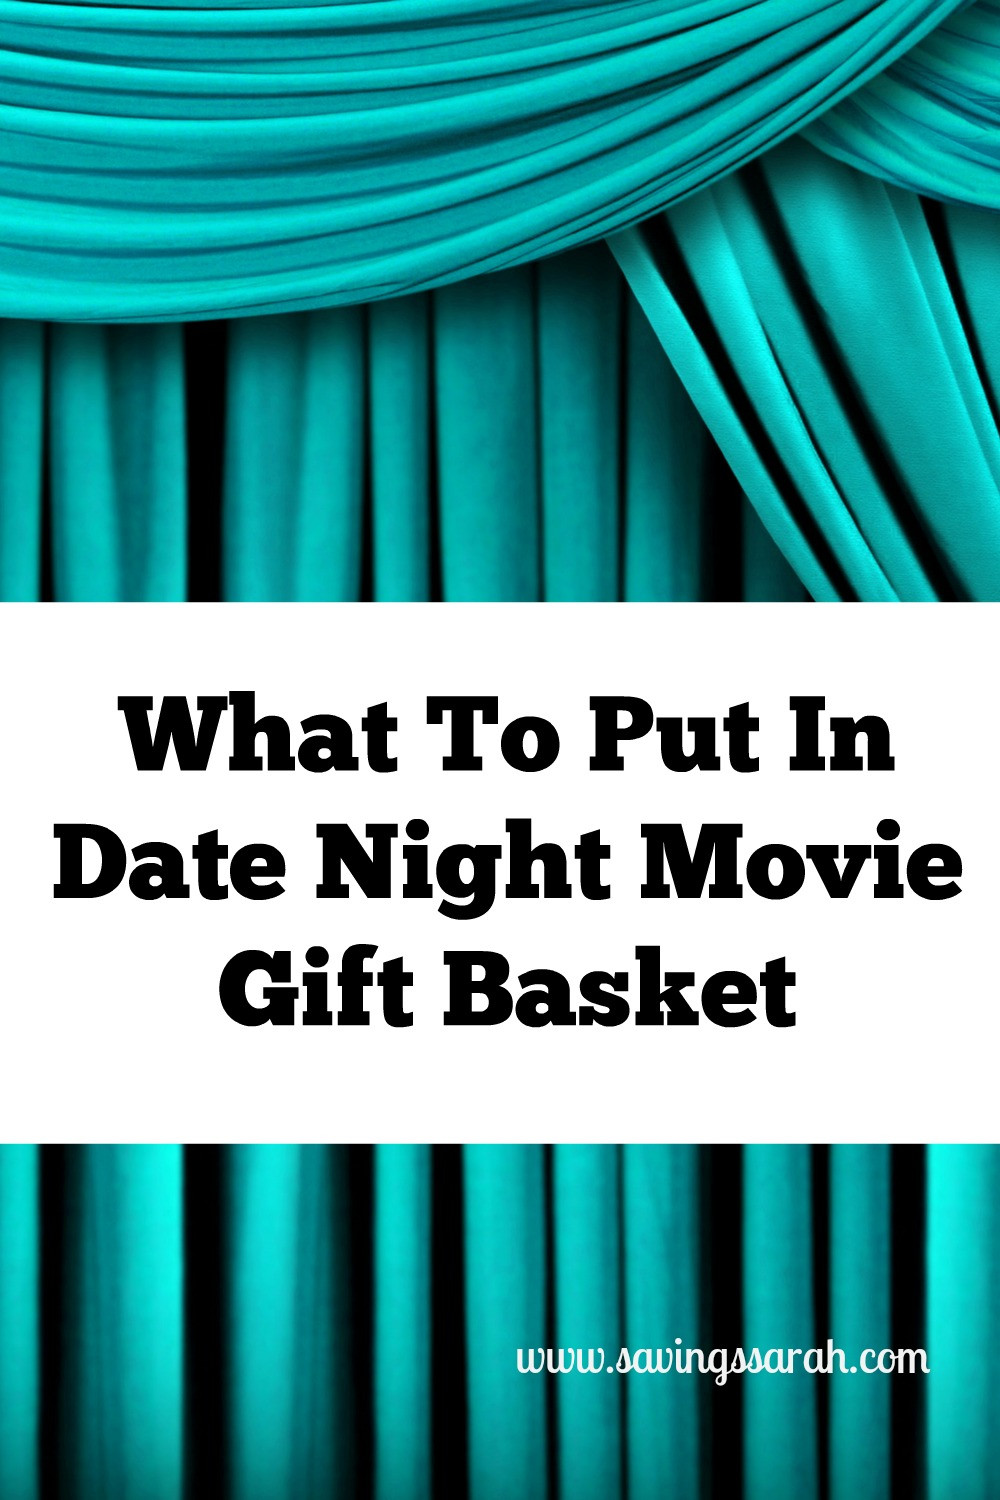 Movie Date Night Gift Basket Ideas
 31 Valentine s Gifts for Men Under $15 Earning and